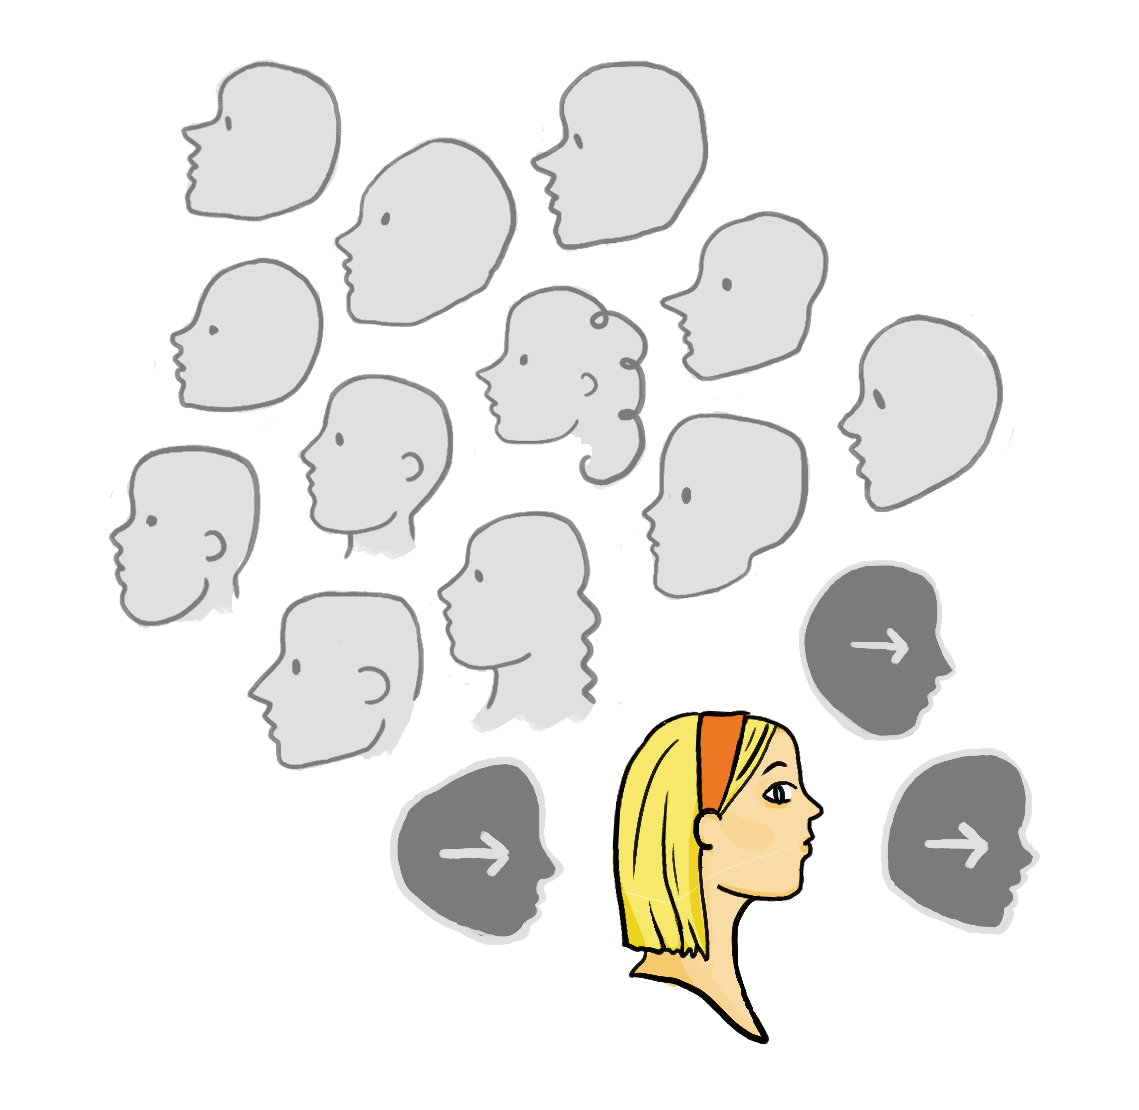 An example graphic where a small group wants to face left but are the only ones represented